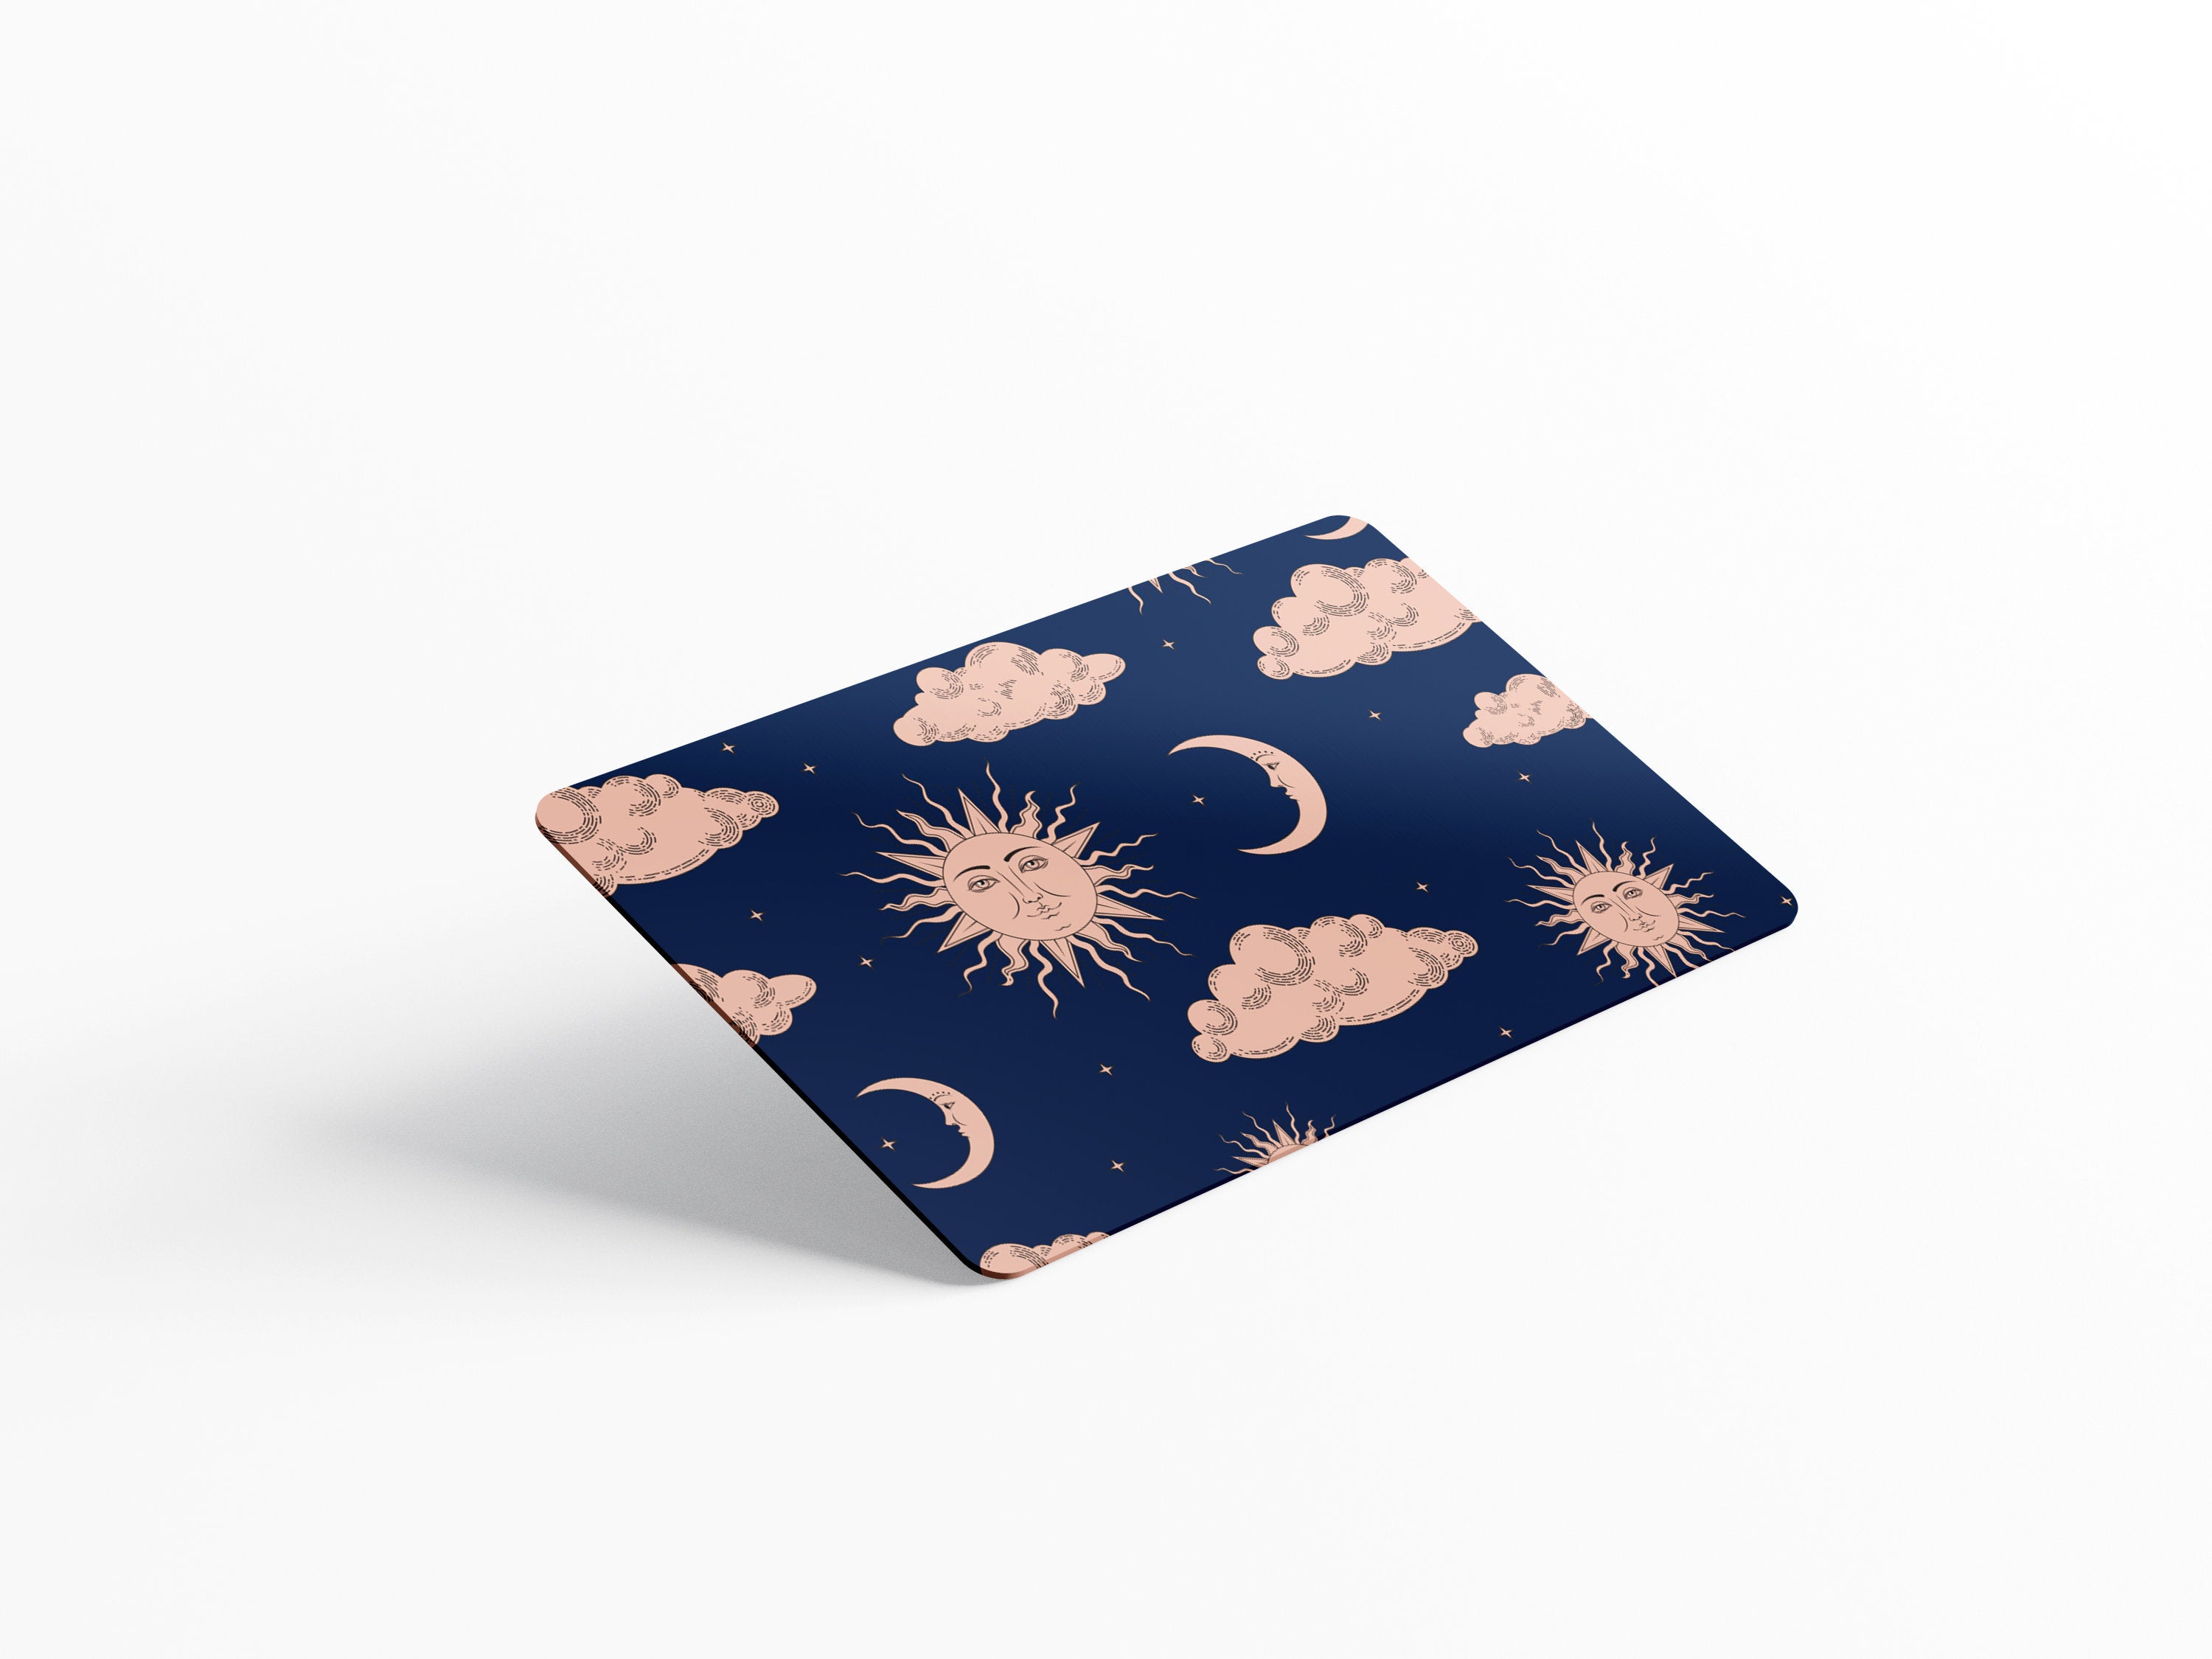  siayaharu Line Topography Credit Card Stickers Skin No Bubble  Slim Waterproof Anti-Wrinkling Removable Vinyl Debit Card Skin Cover Credit  Card Decals : Office Products